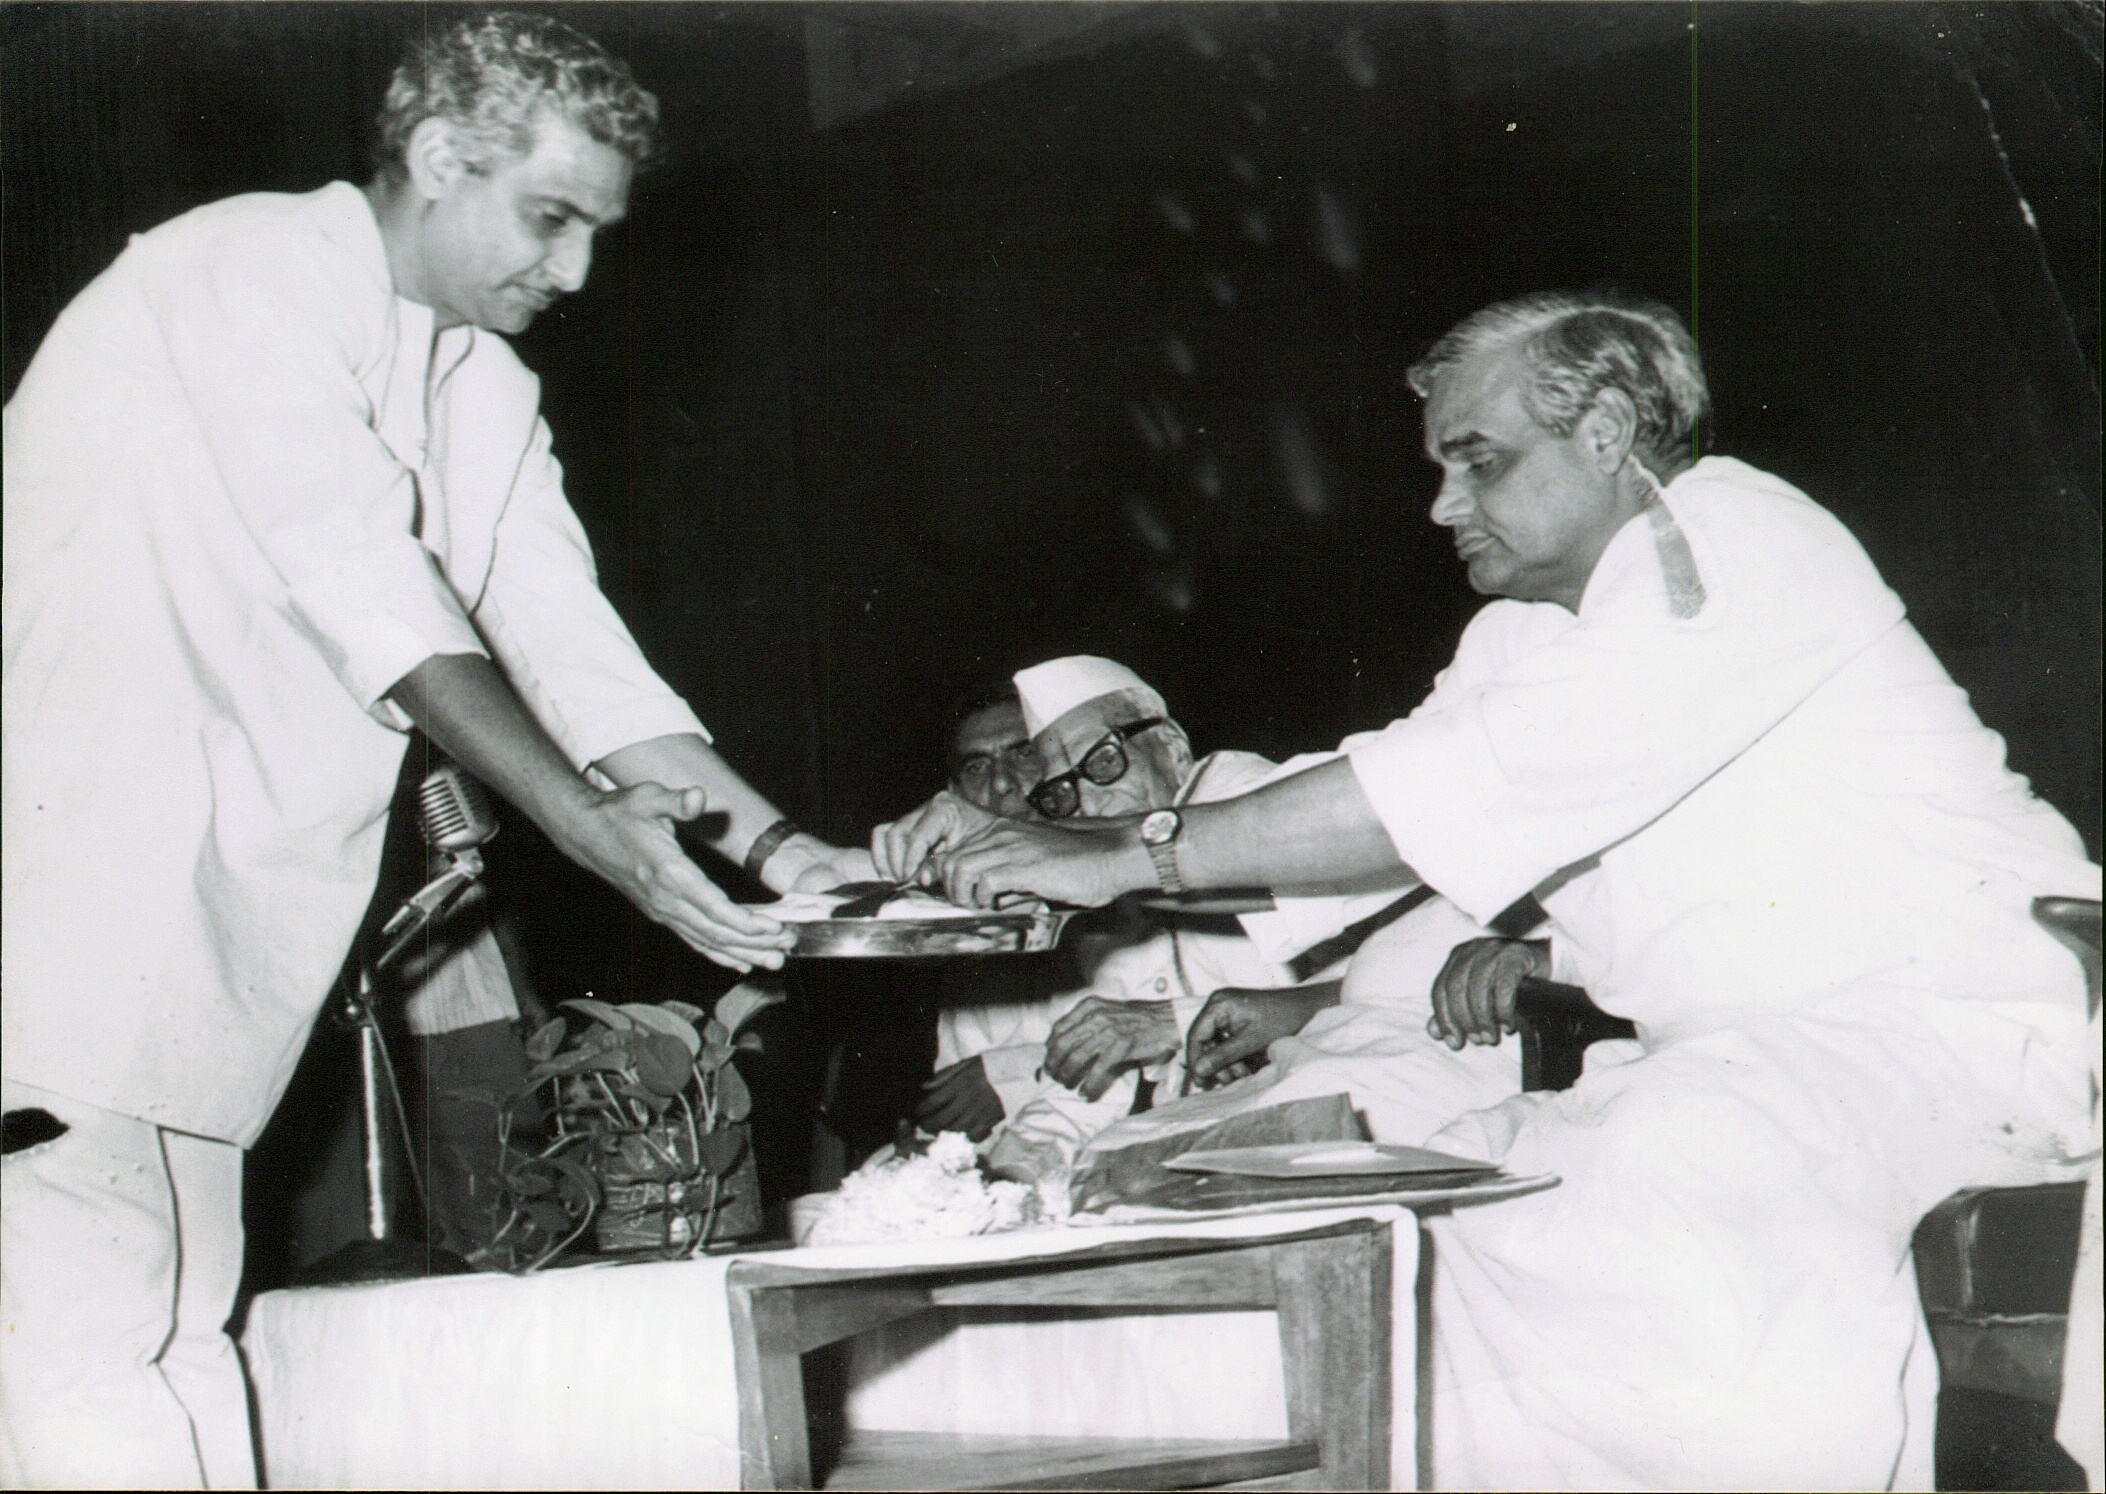 Ex Indian Prime Minister Atal Behari Vajpayee honoring my Great-Grand Father in New Delhi